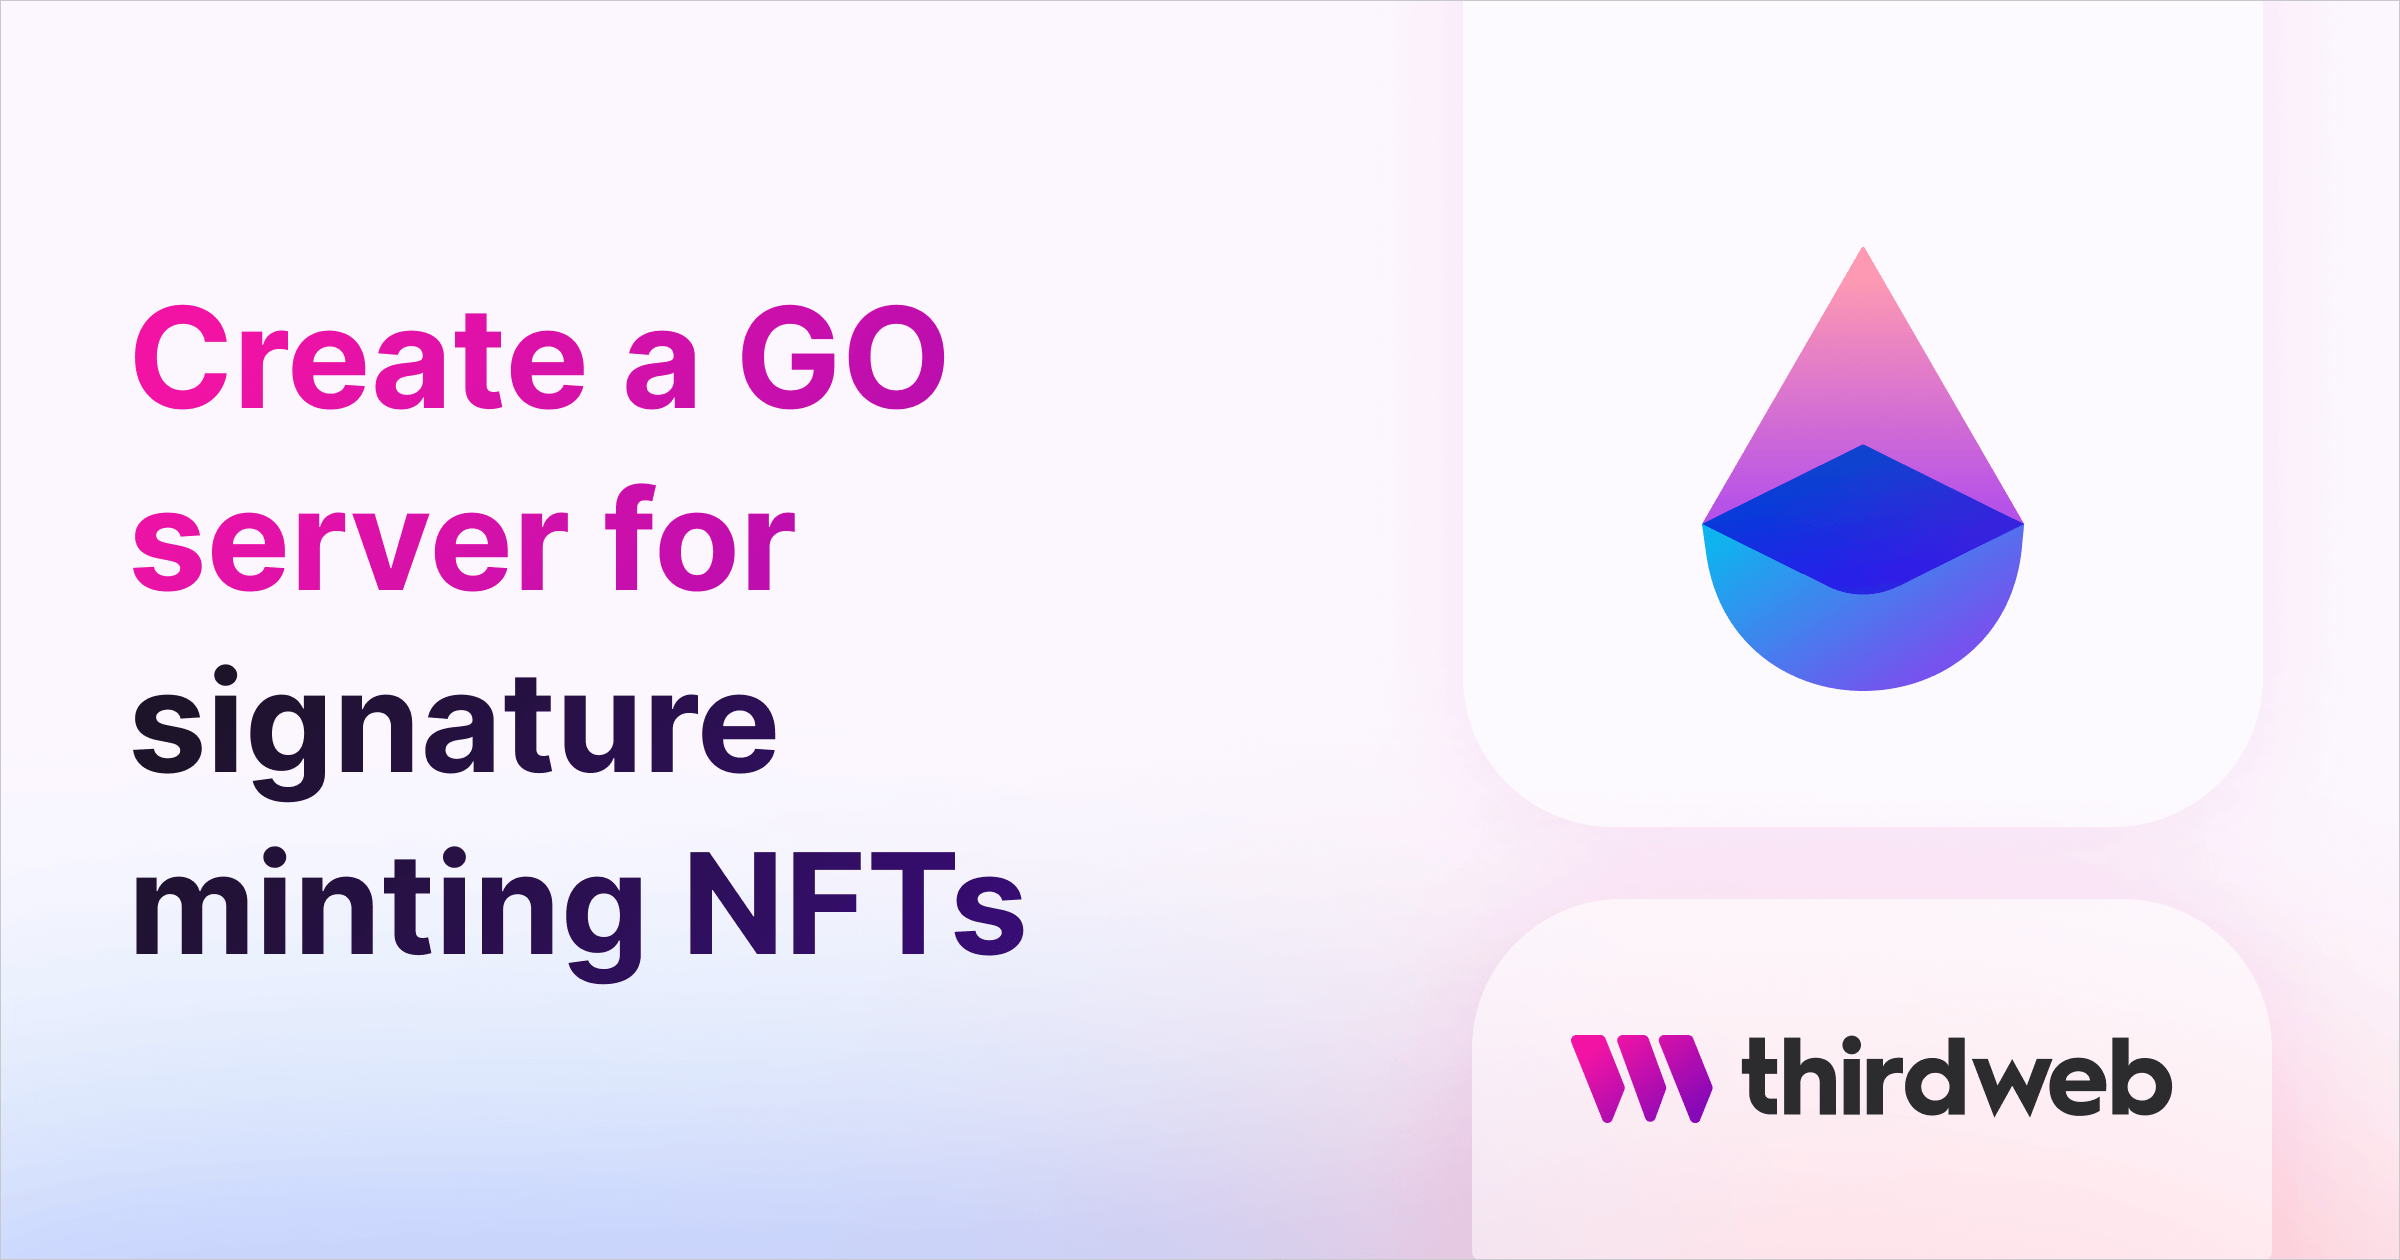 Create a GO server for signature minting NFTs